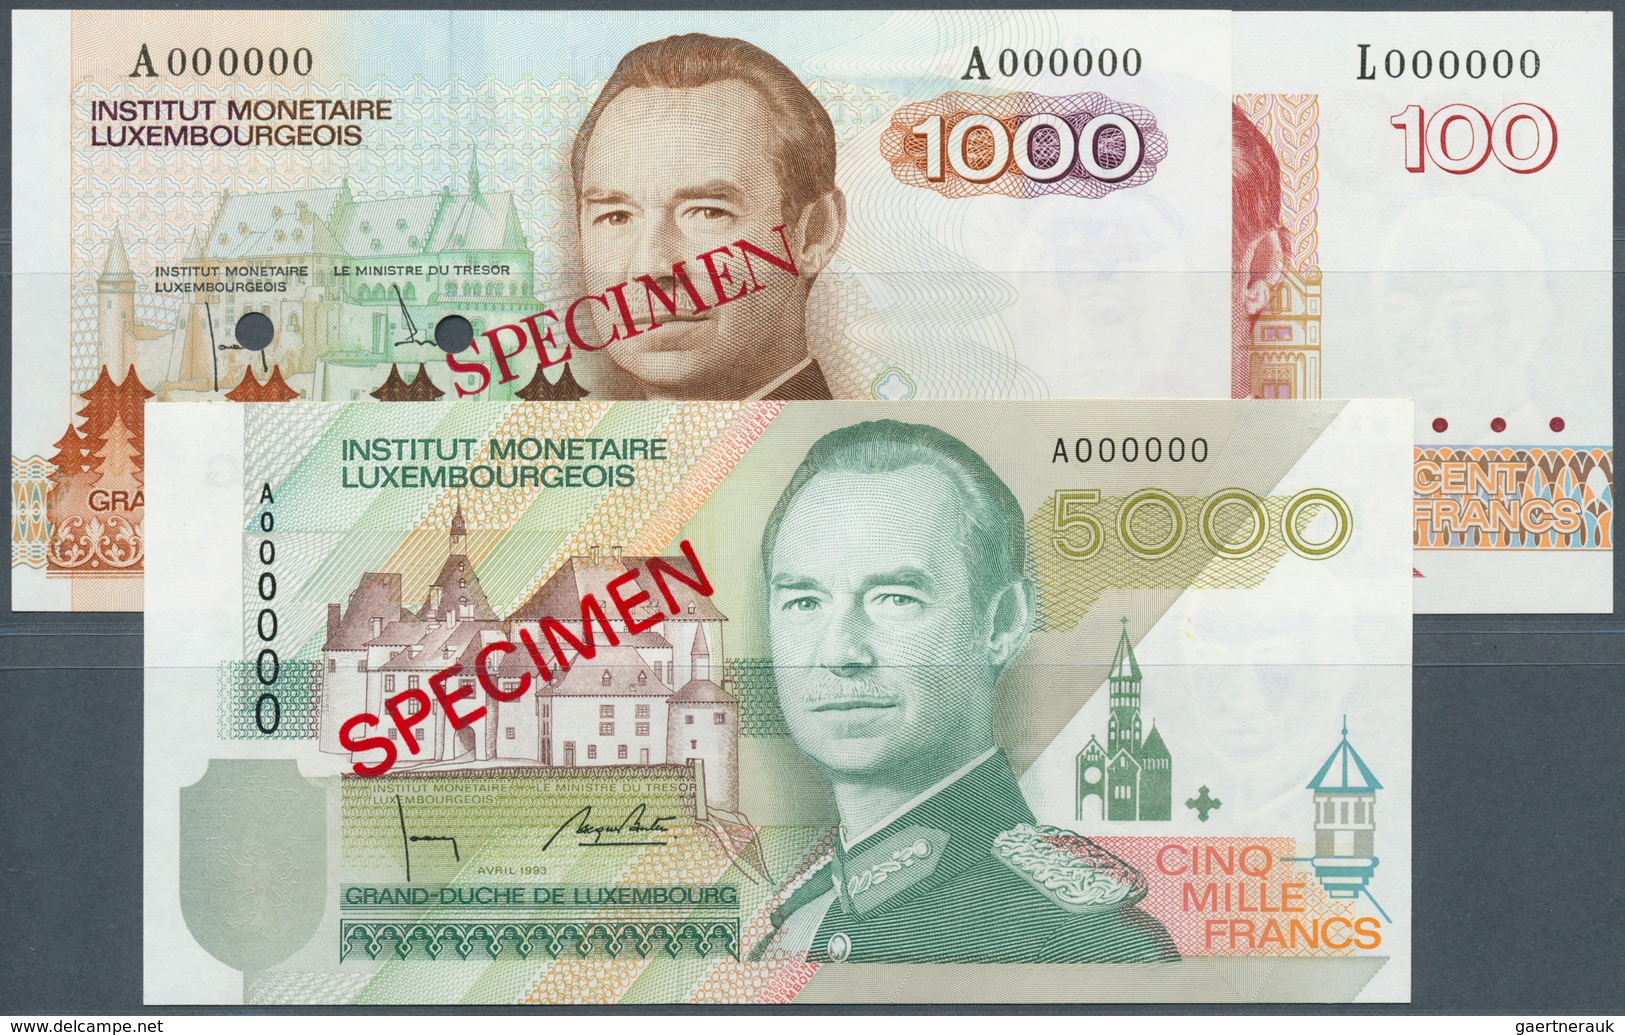 01948 Luxembourg: Set Of 3 Specimen Banknotes Containing 100 Francs P. 58s, 1000 Francs P. 59s And 5000 Fr - Luxembourg